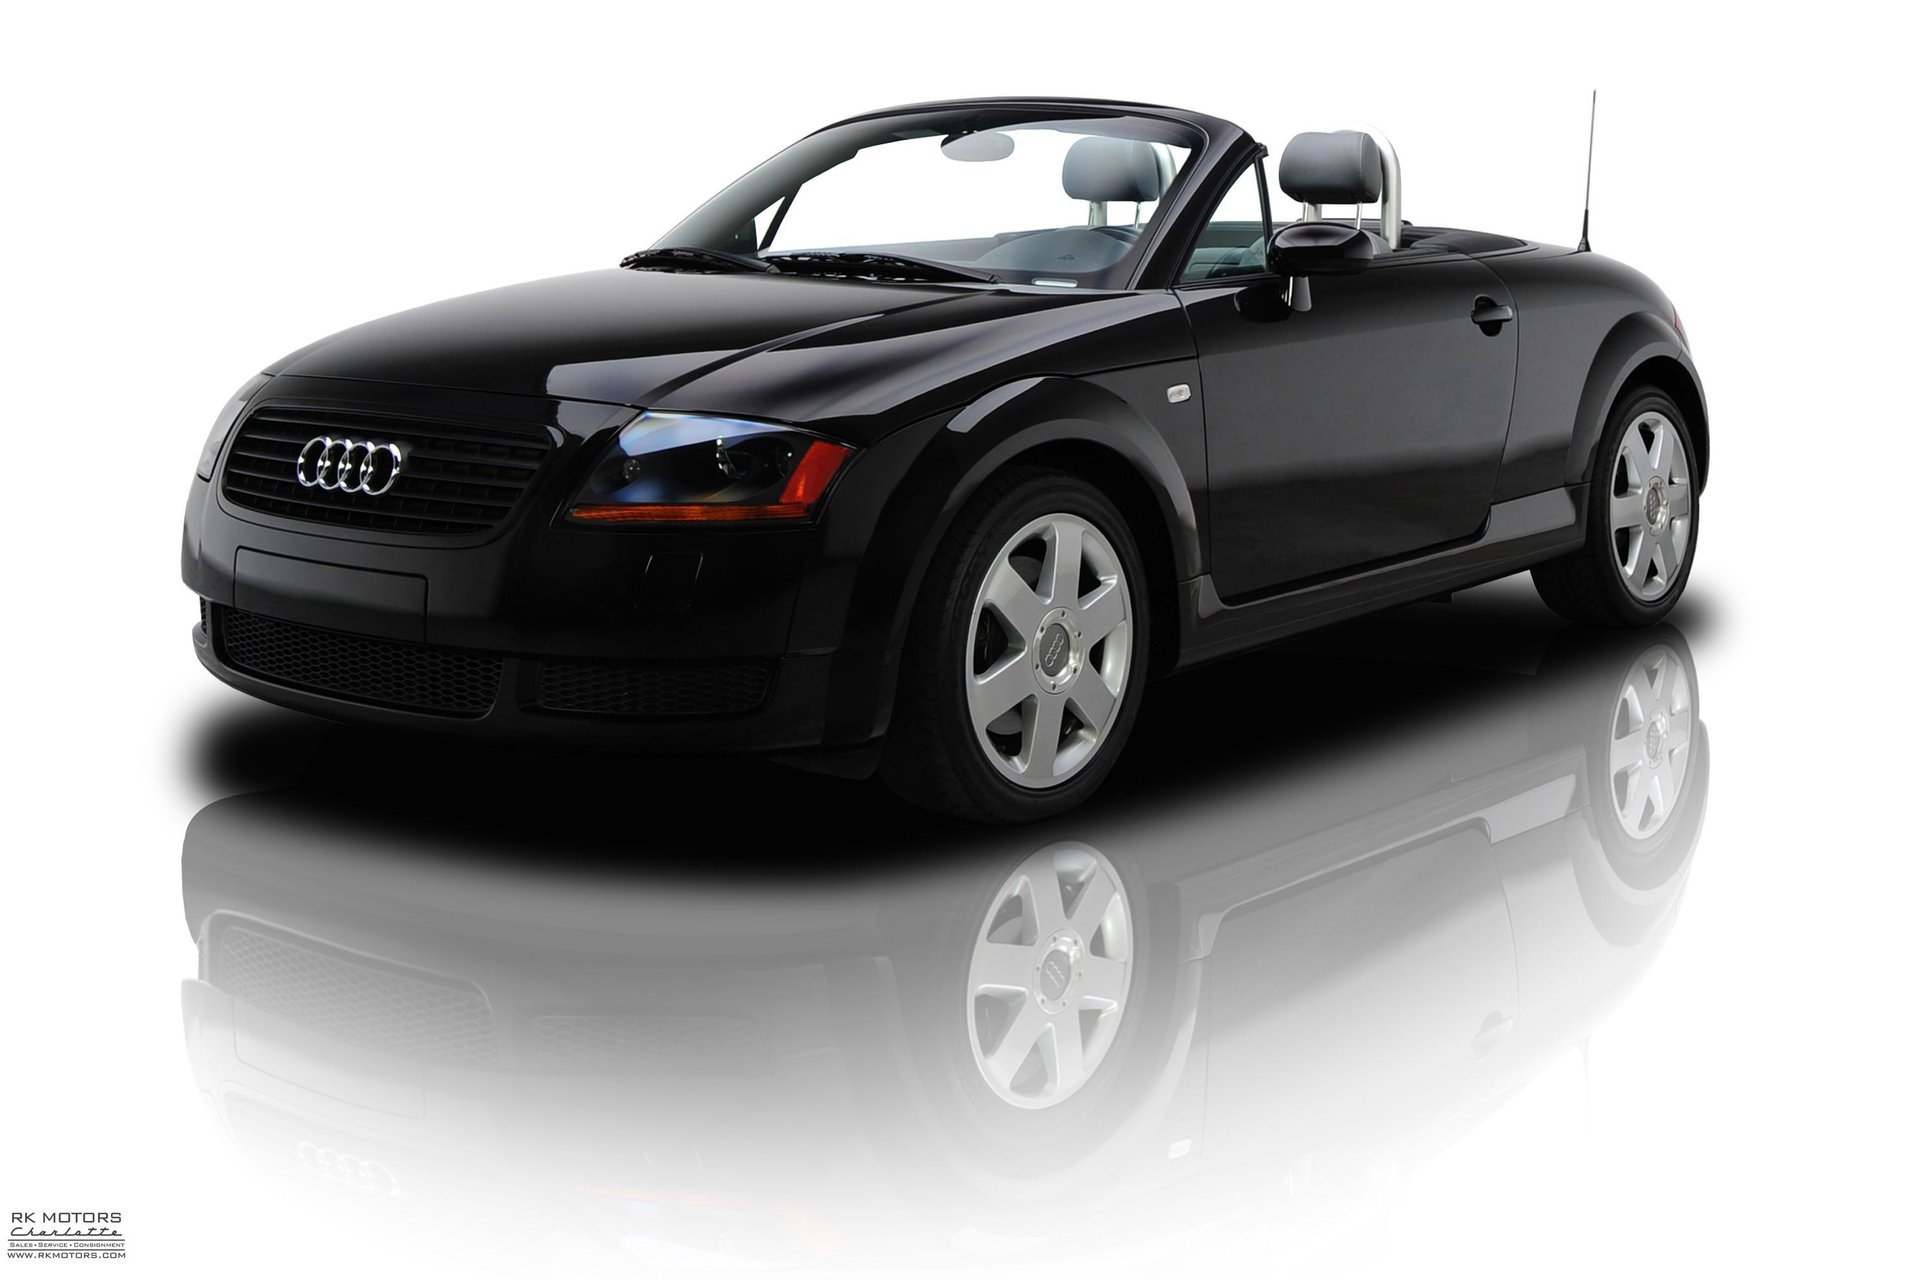 132979 2002 Audi TT RK Motors Classic Cars and Muscle Cars for Sale